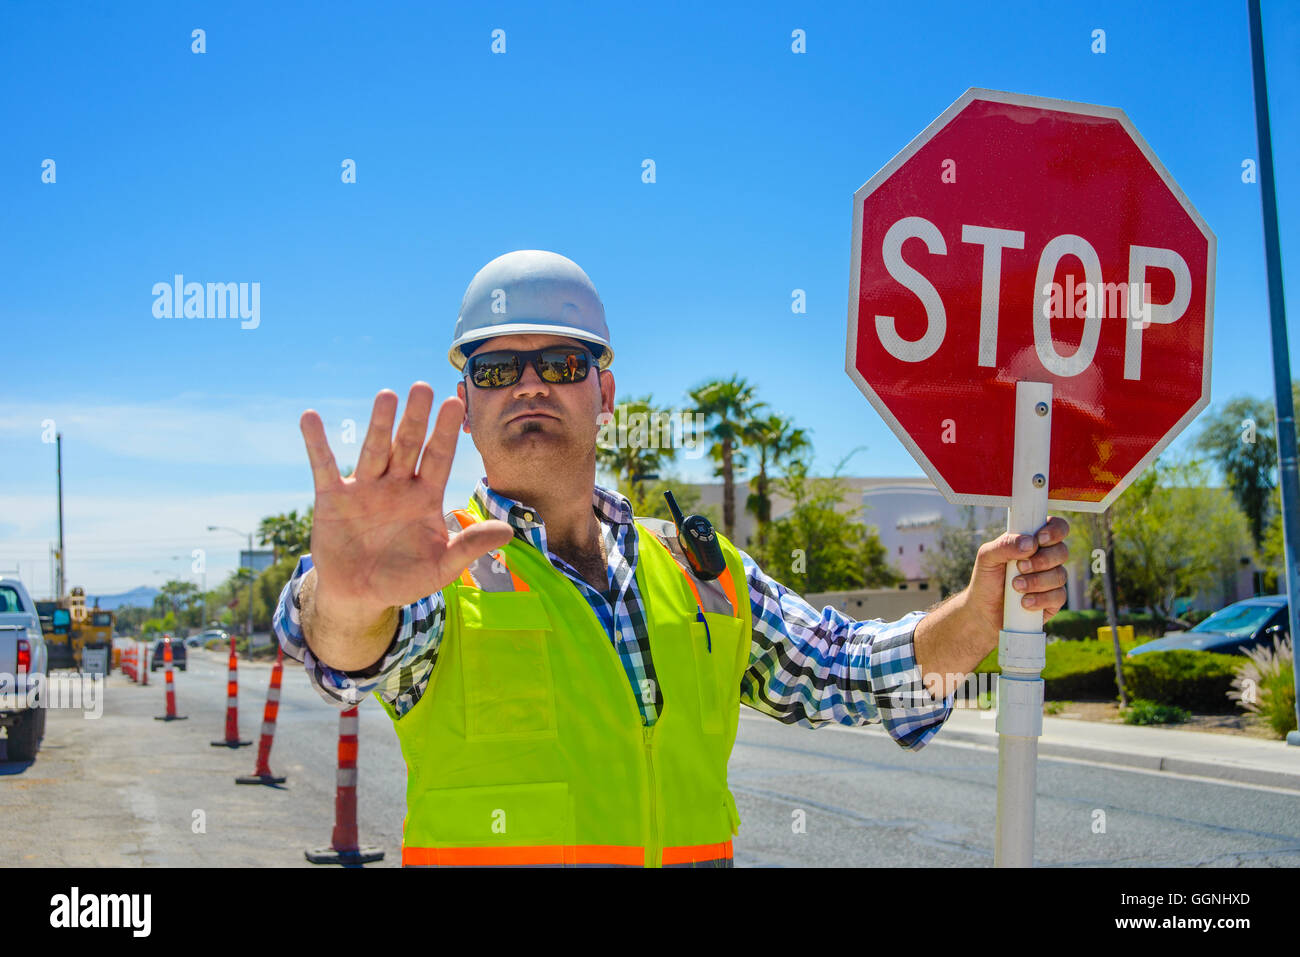 Caucasian flagger gesturing stop with stop sign Stock Photo